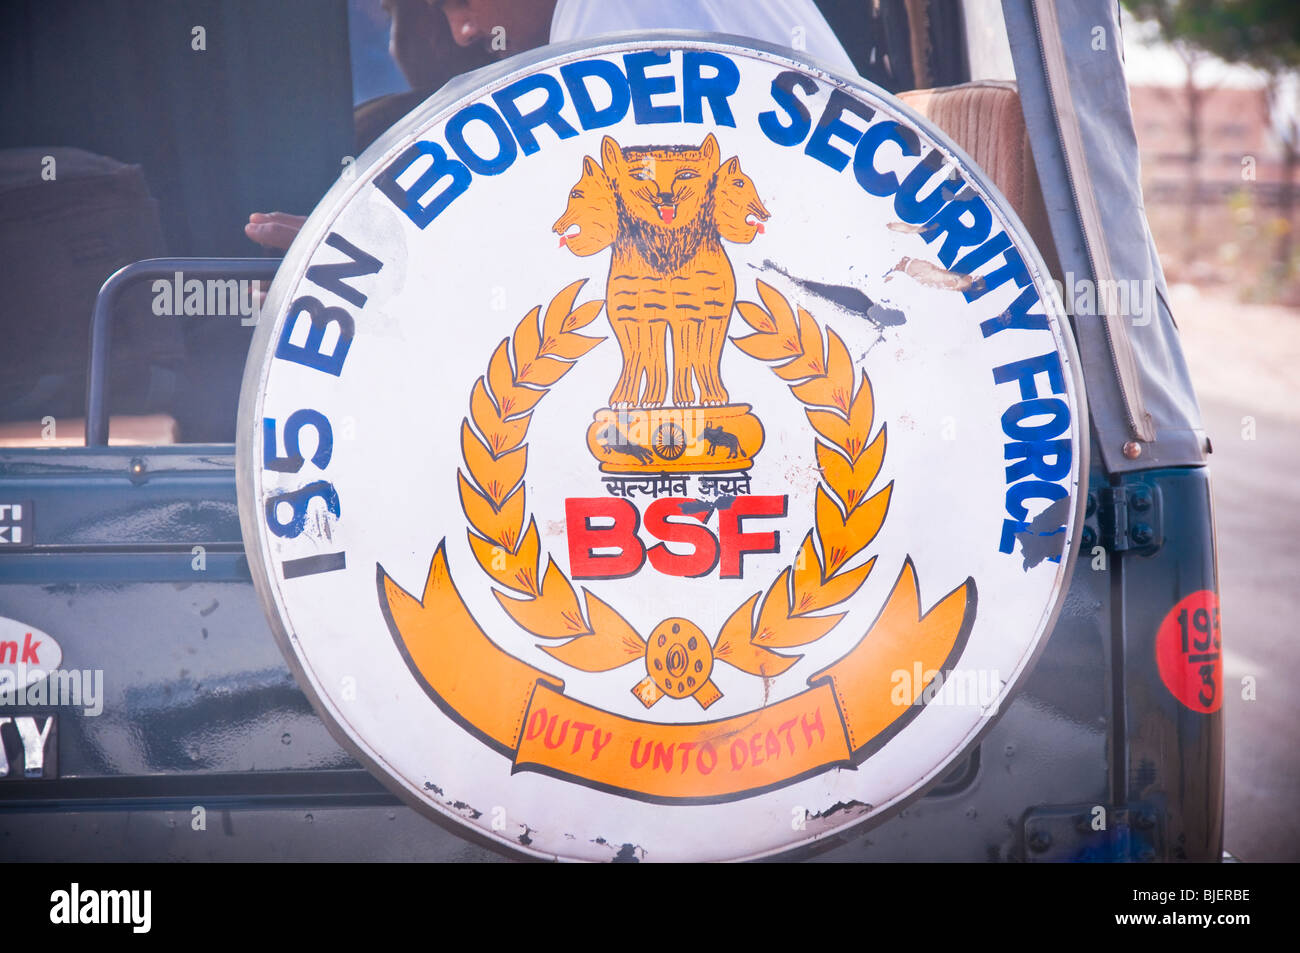 Border security force sign on back of vehicle in India Stock Photo